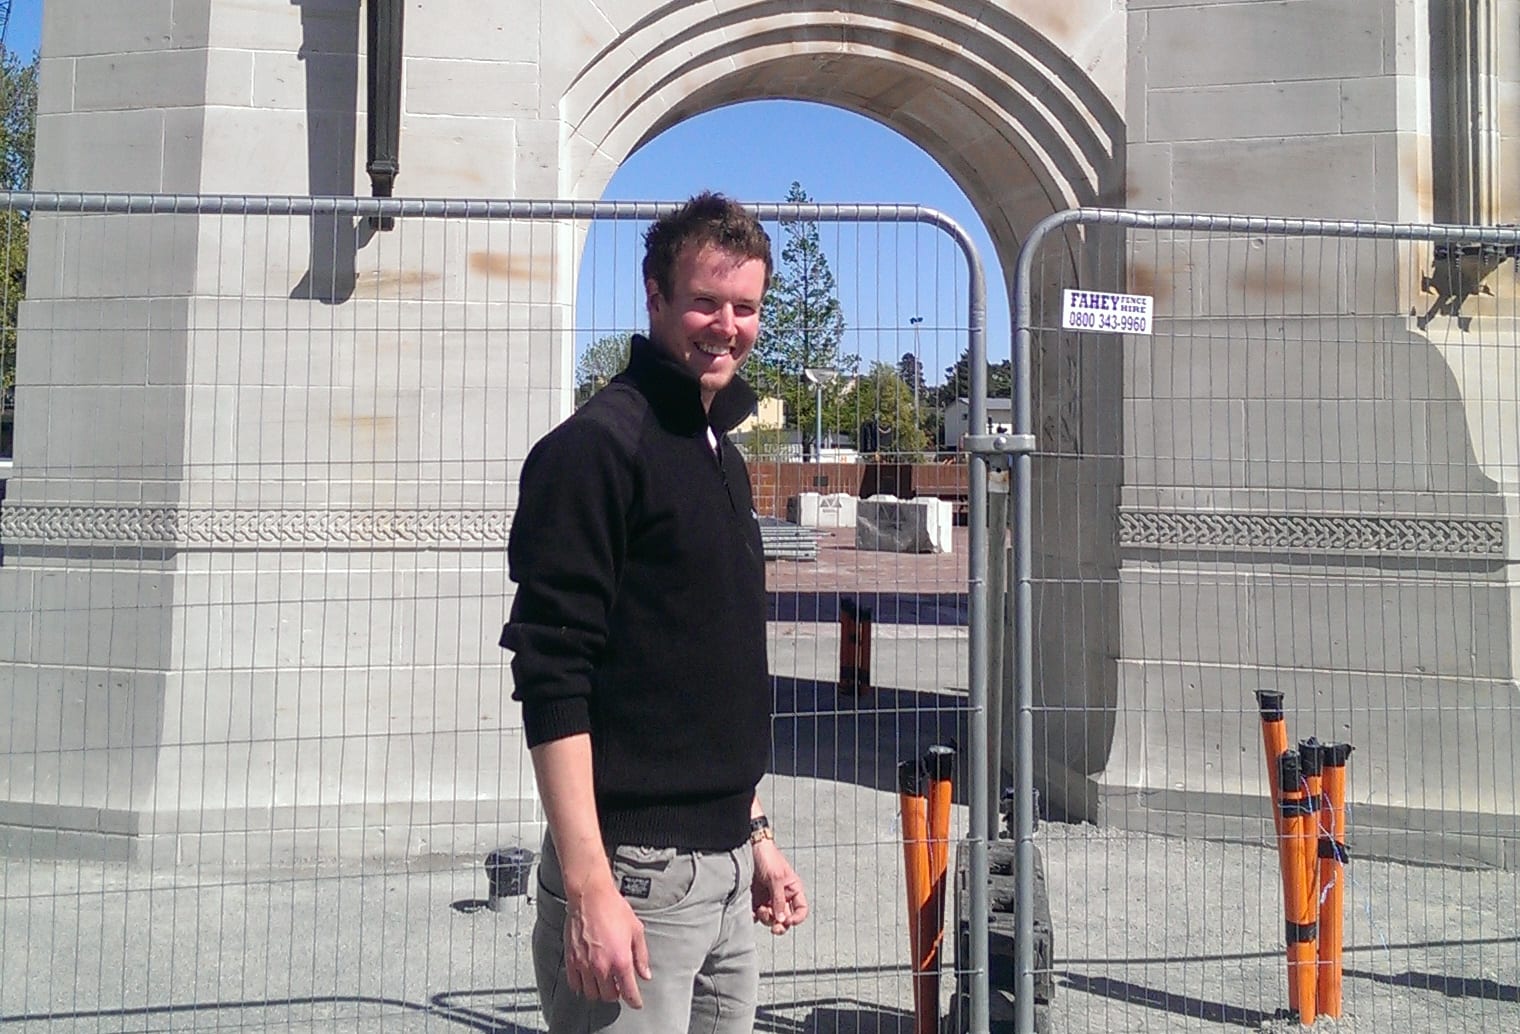 SCIRT site engineer David Kennedy described fixing Christchurch's earthquake-damaged Triumphal Arch as one of his most challenging jobs yet.